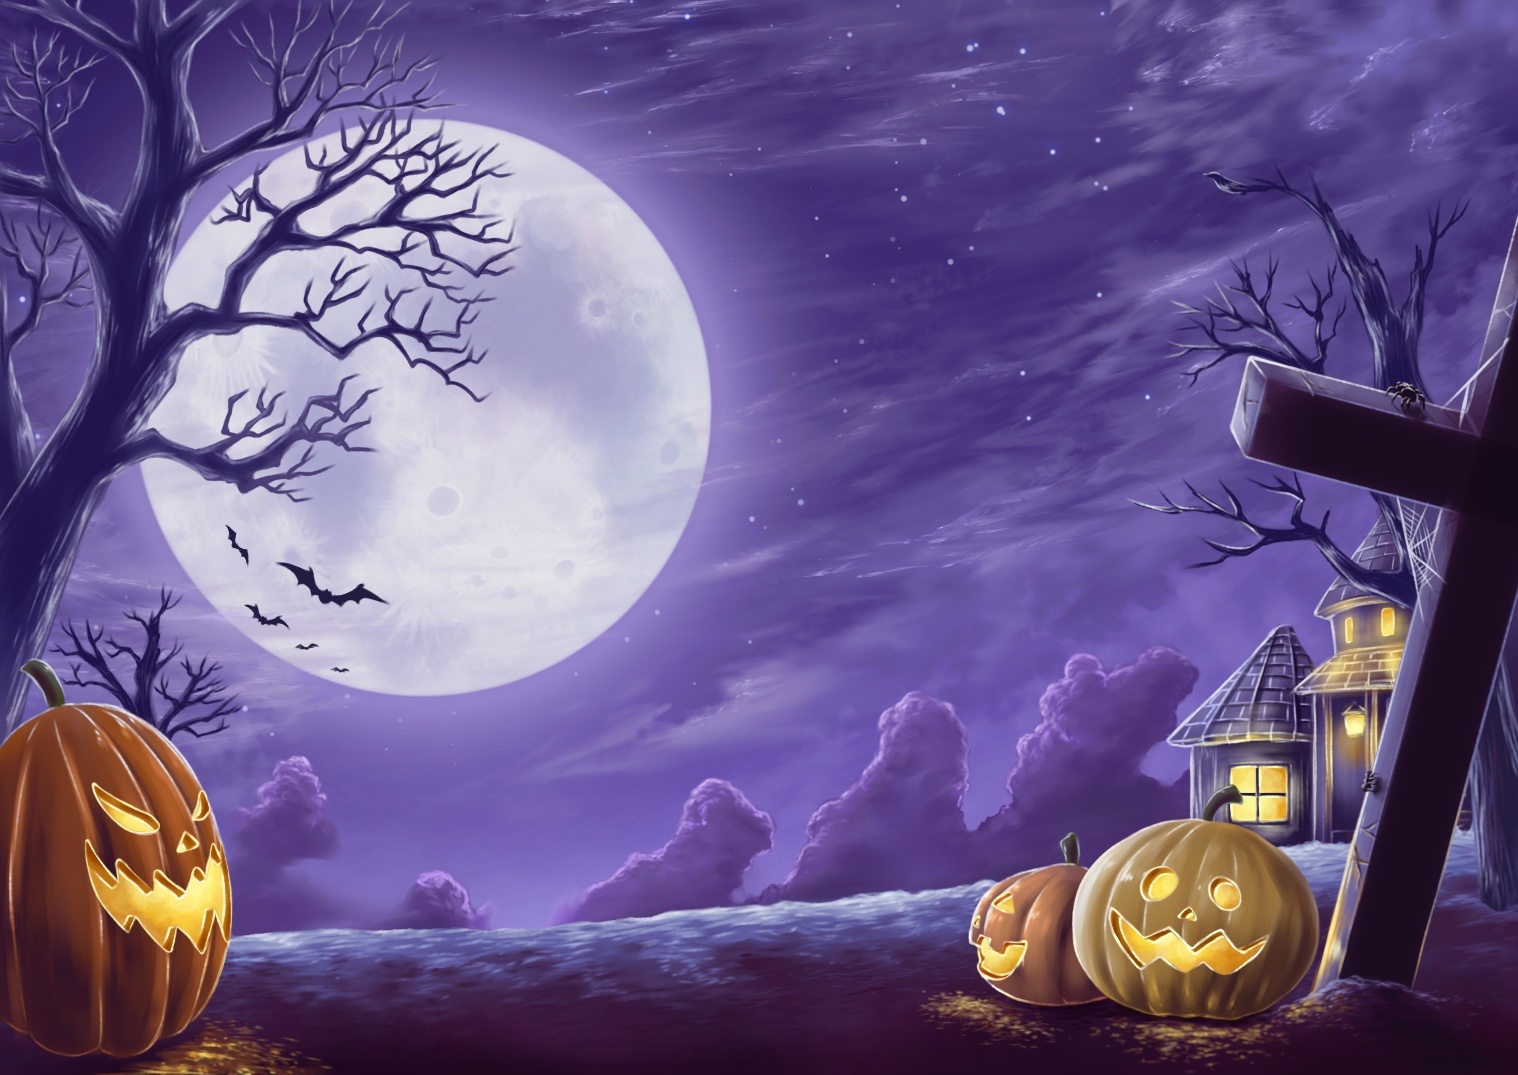 Halloween freebies: 11 Types of Halloween Illustrations and Templates for Free Download